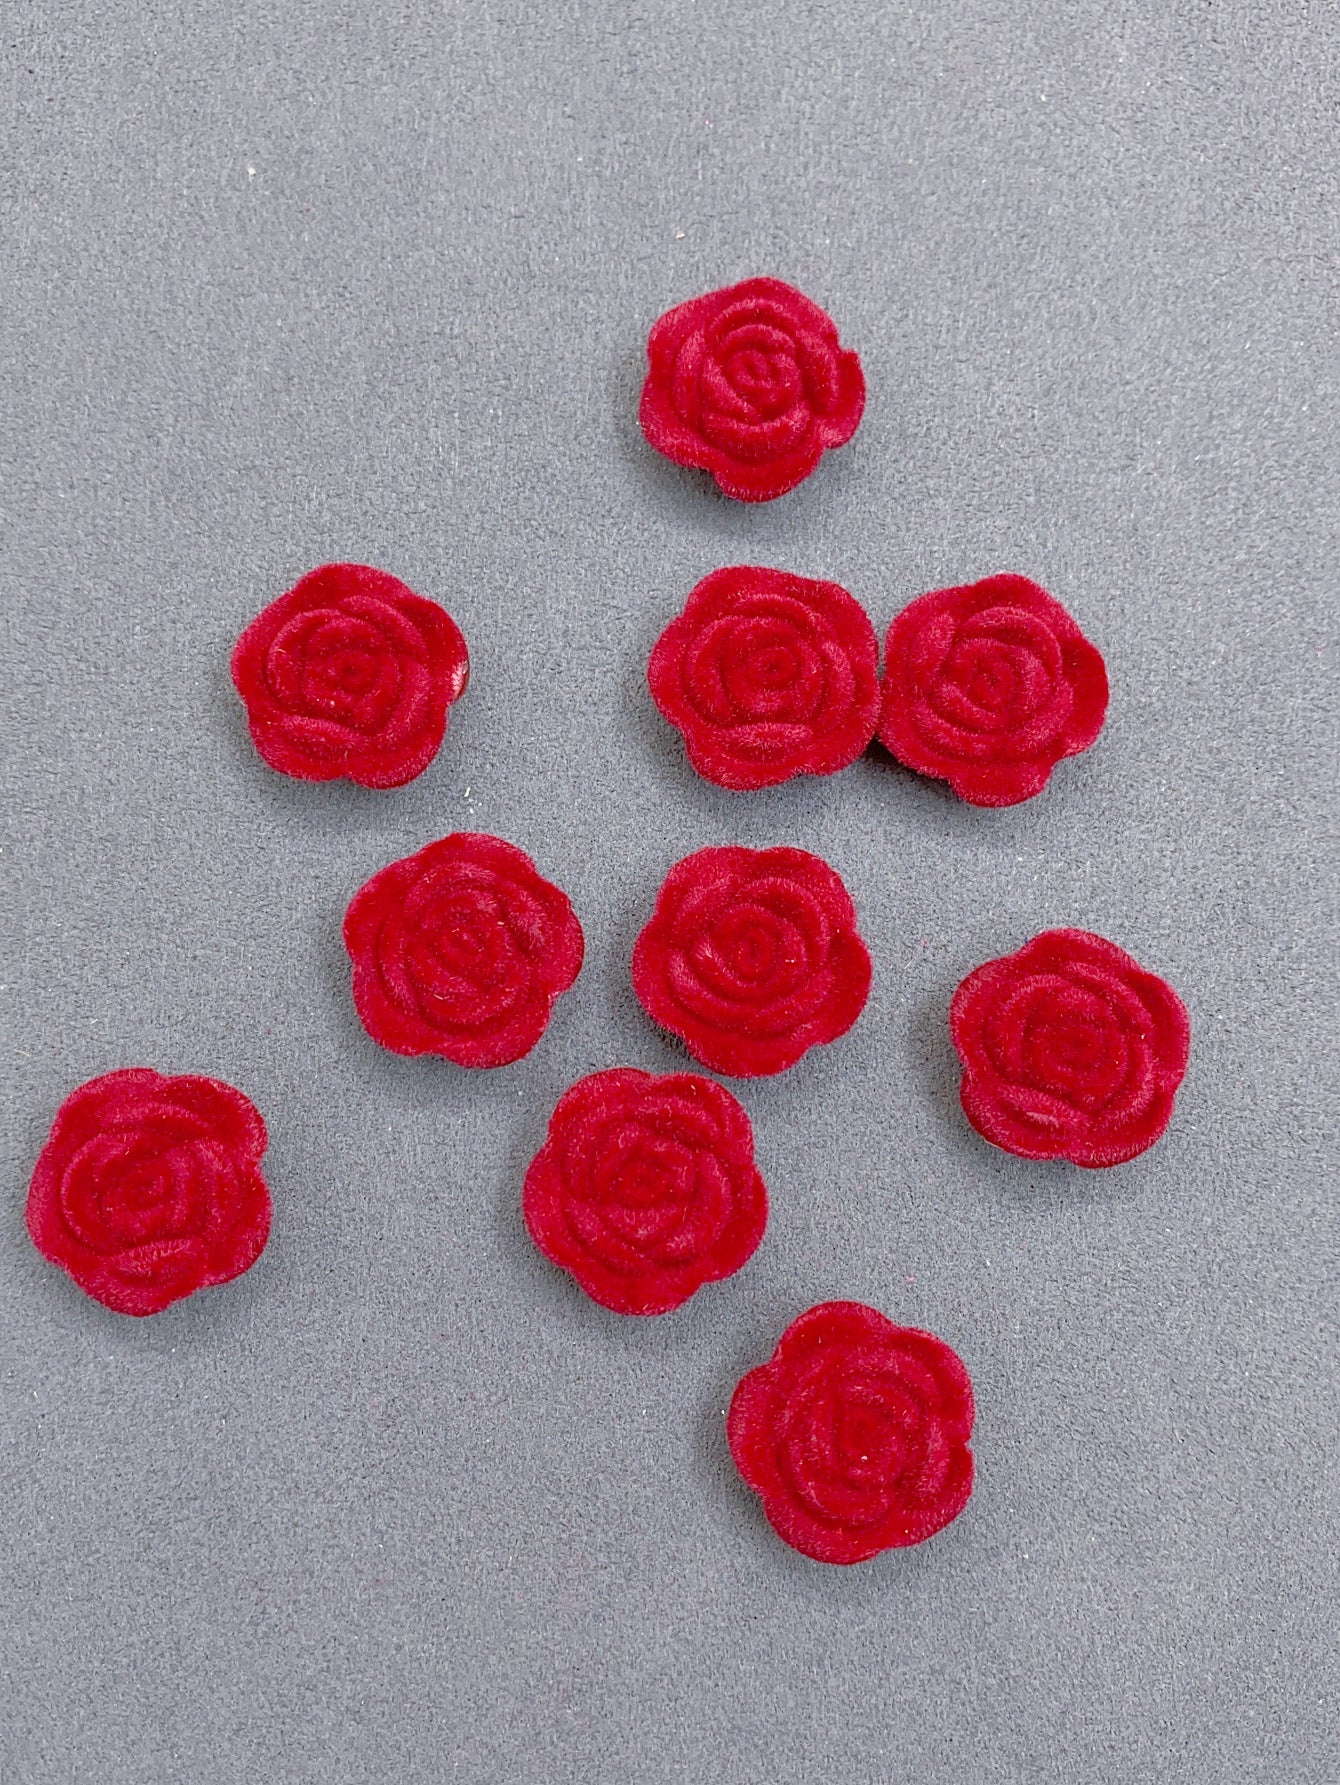 Acrylic solid color single hole straight hole flocking rose beads jewelry accessories hair accessories clothing accessories materials